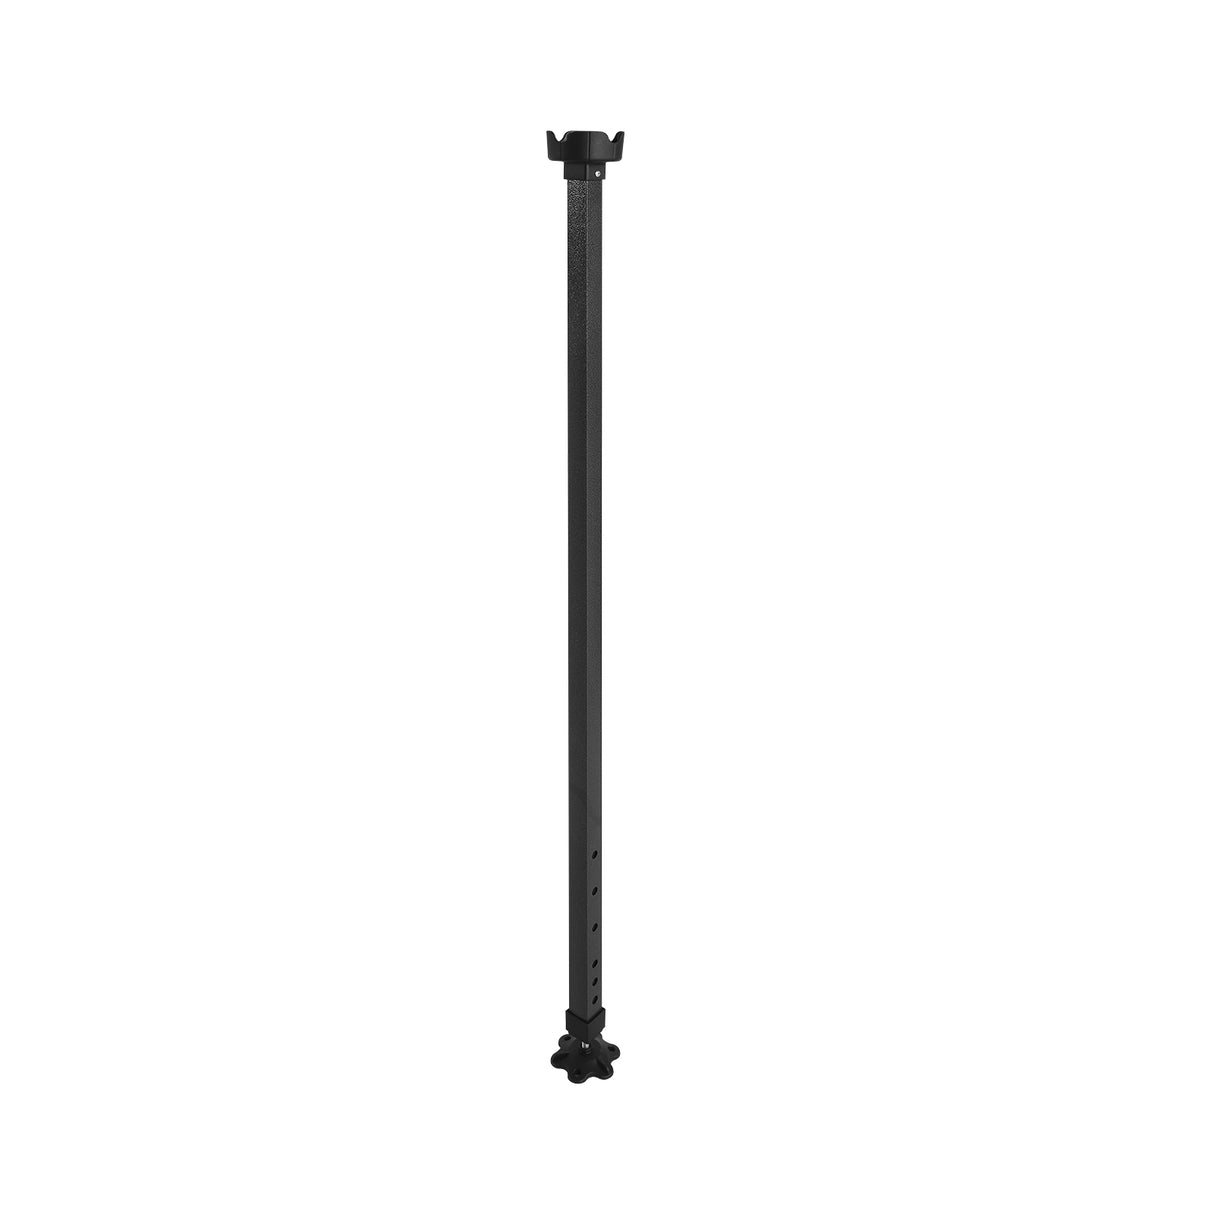 GH96 Support Pole